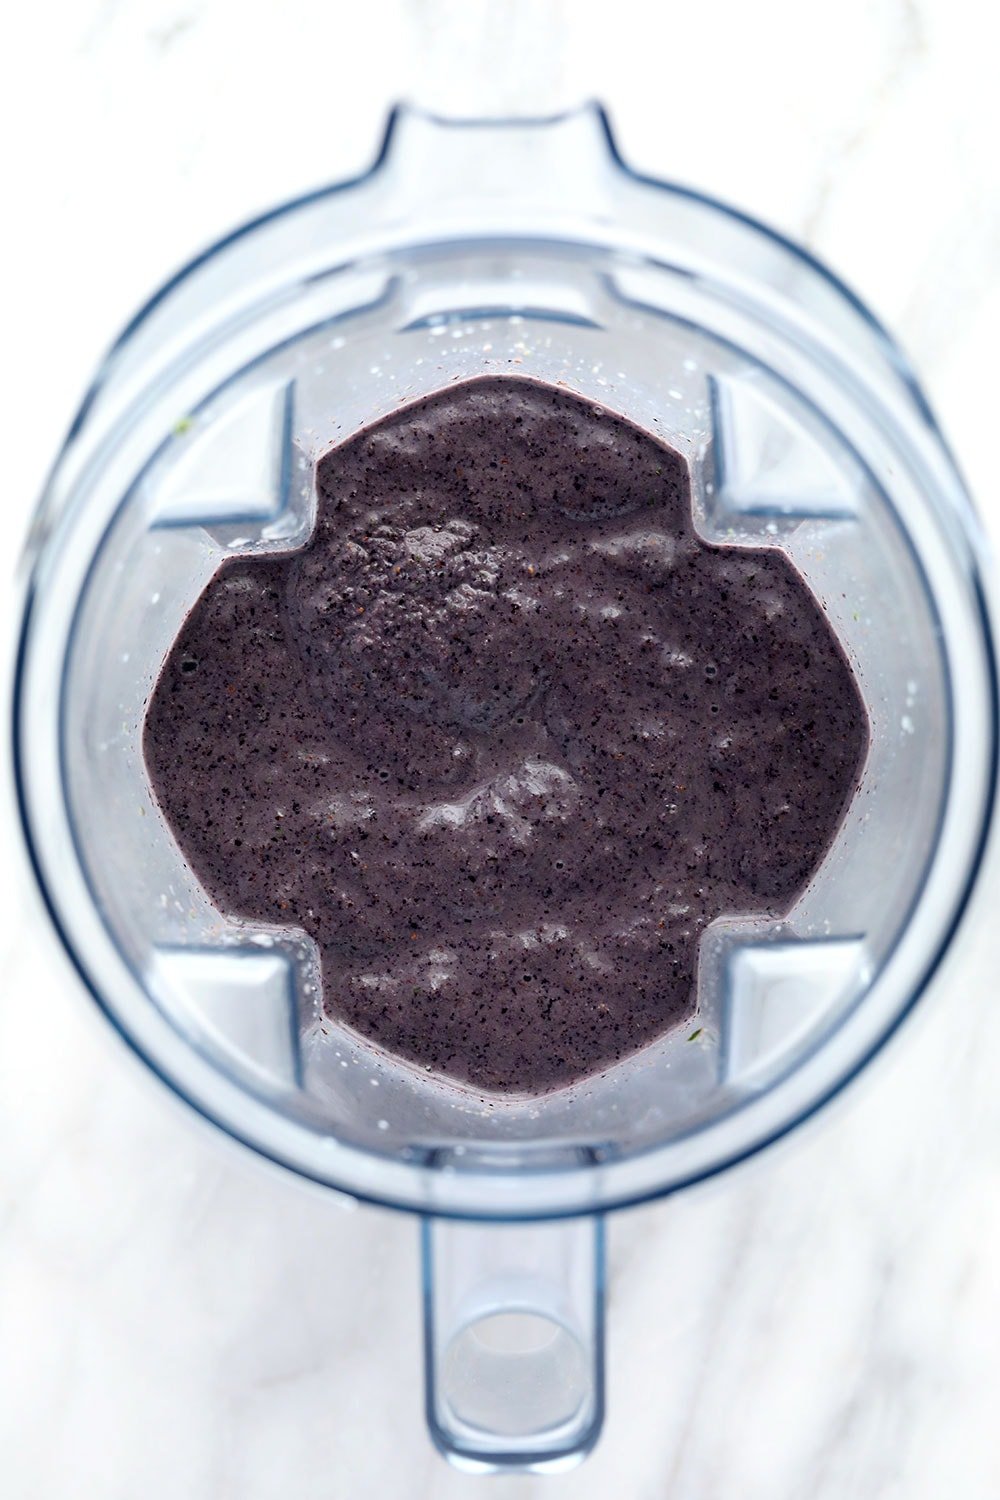 Blended blueberry superfood smoothie.